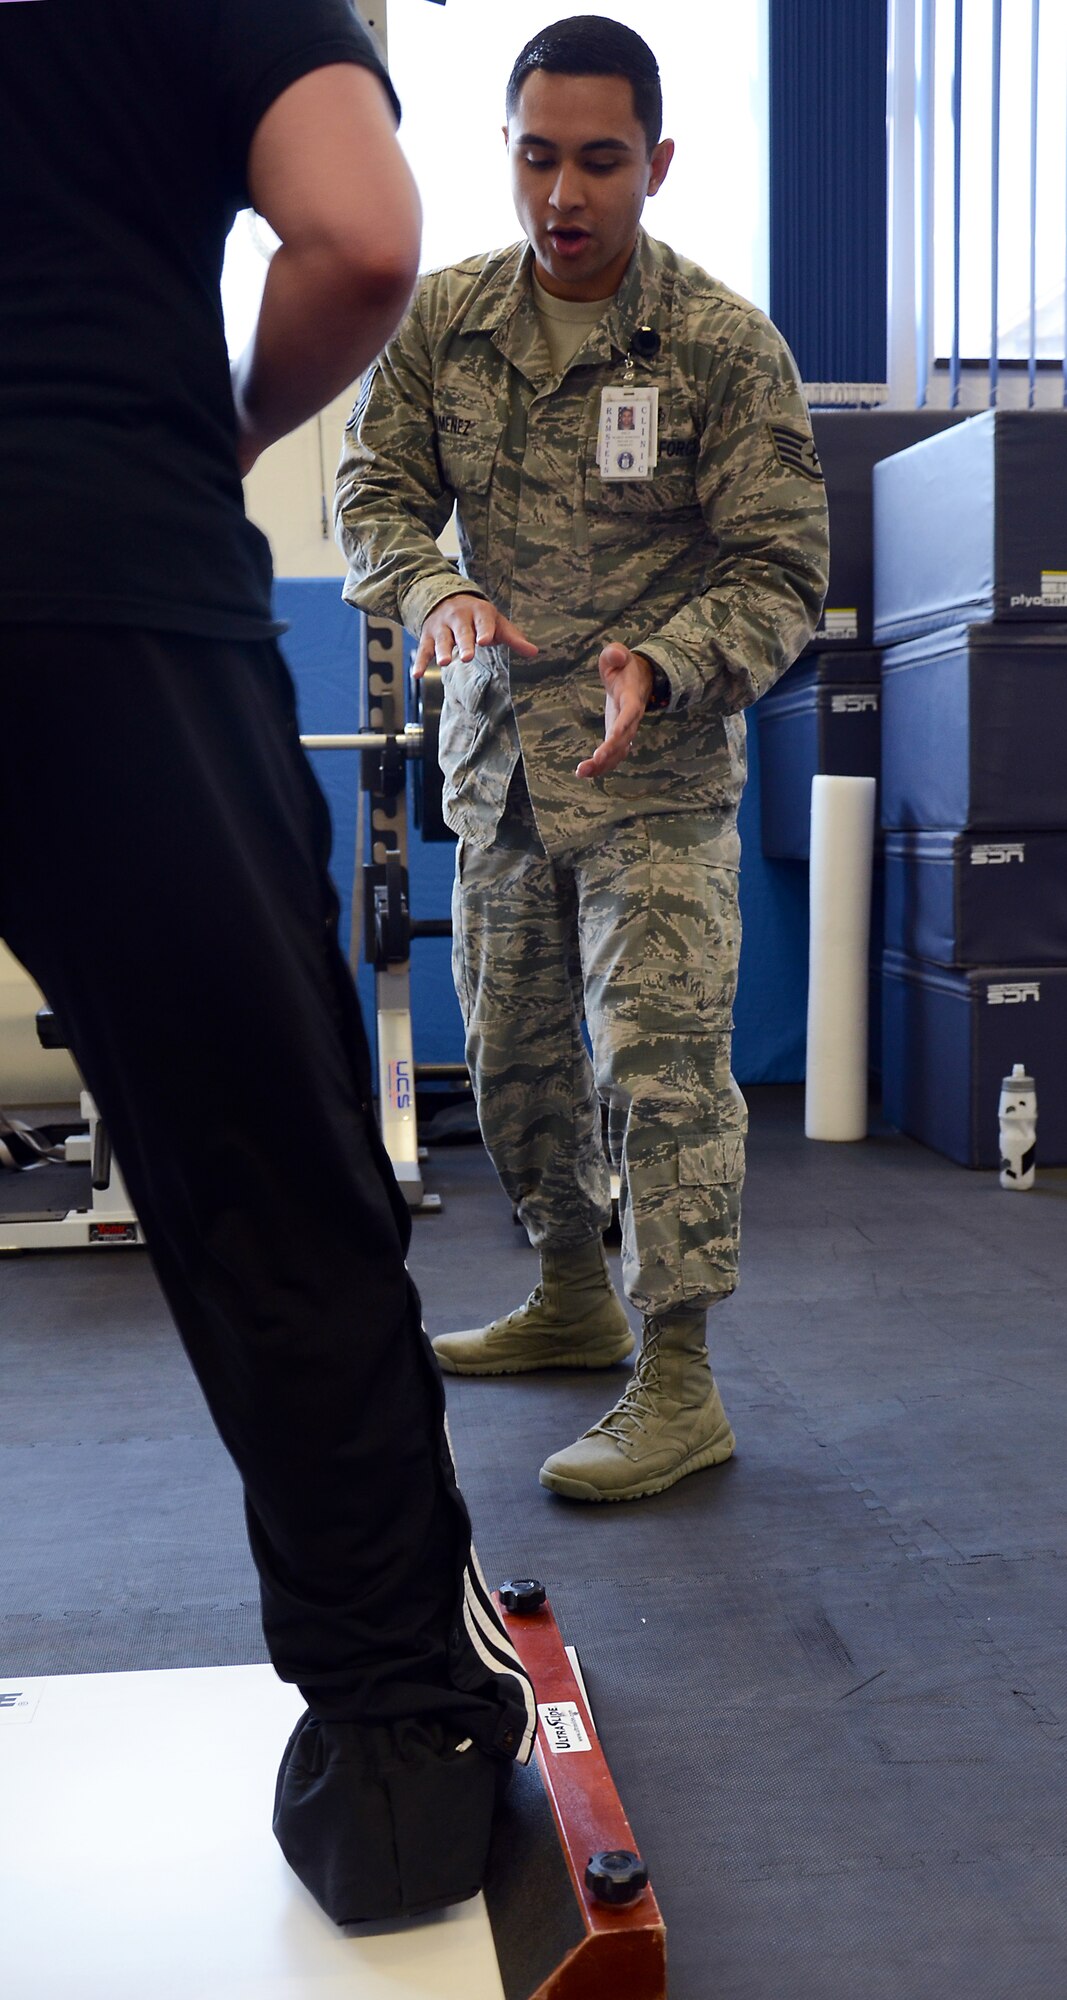 Staff Sgt. Mario Jimenez, 86th Medical Operations Squadron Physical Therapy technician, explains the purpose of an exercise to Senior Airman James Harrod, 693rd Intelligence, Surveillance and Reconnaissance Group operations training manager, during a physical therapy session at Ramstein Air Base, Germany, Aug. 19, 2014. The physical therapy clinic at Ramstein conducts an average of 200 to 250 sessions a week. (U.S. Air Force photo/Senior Airman Timothy Moore)